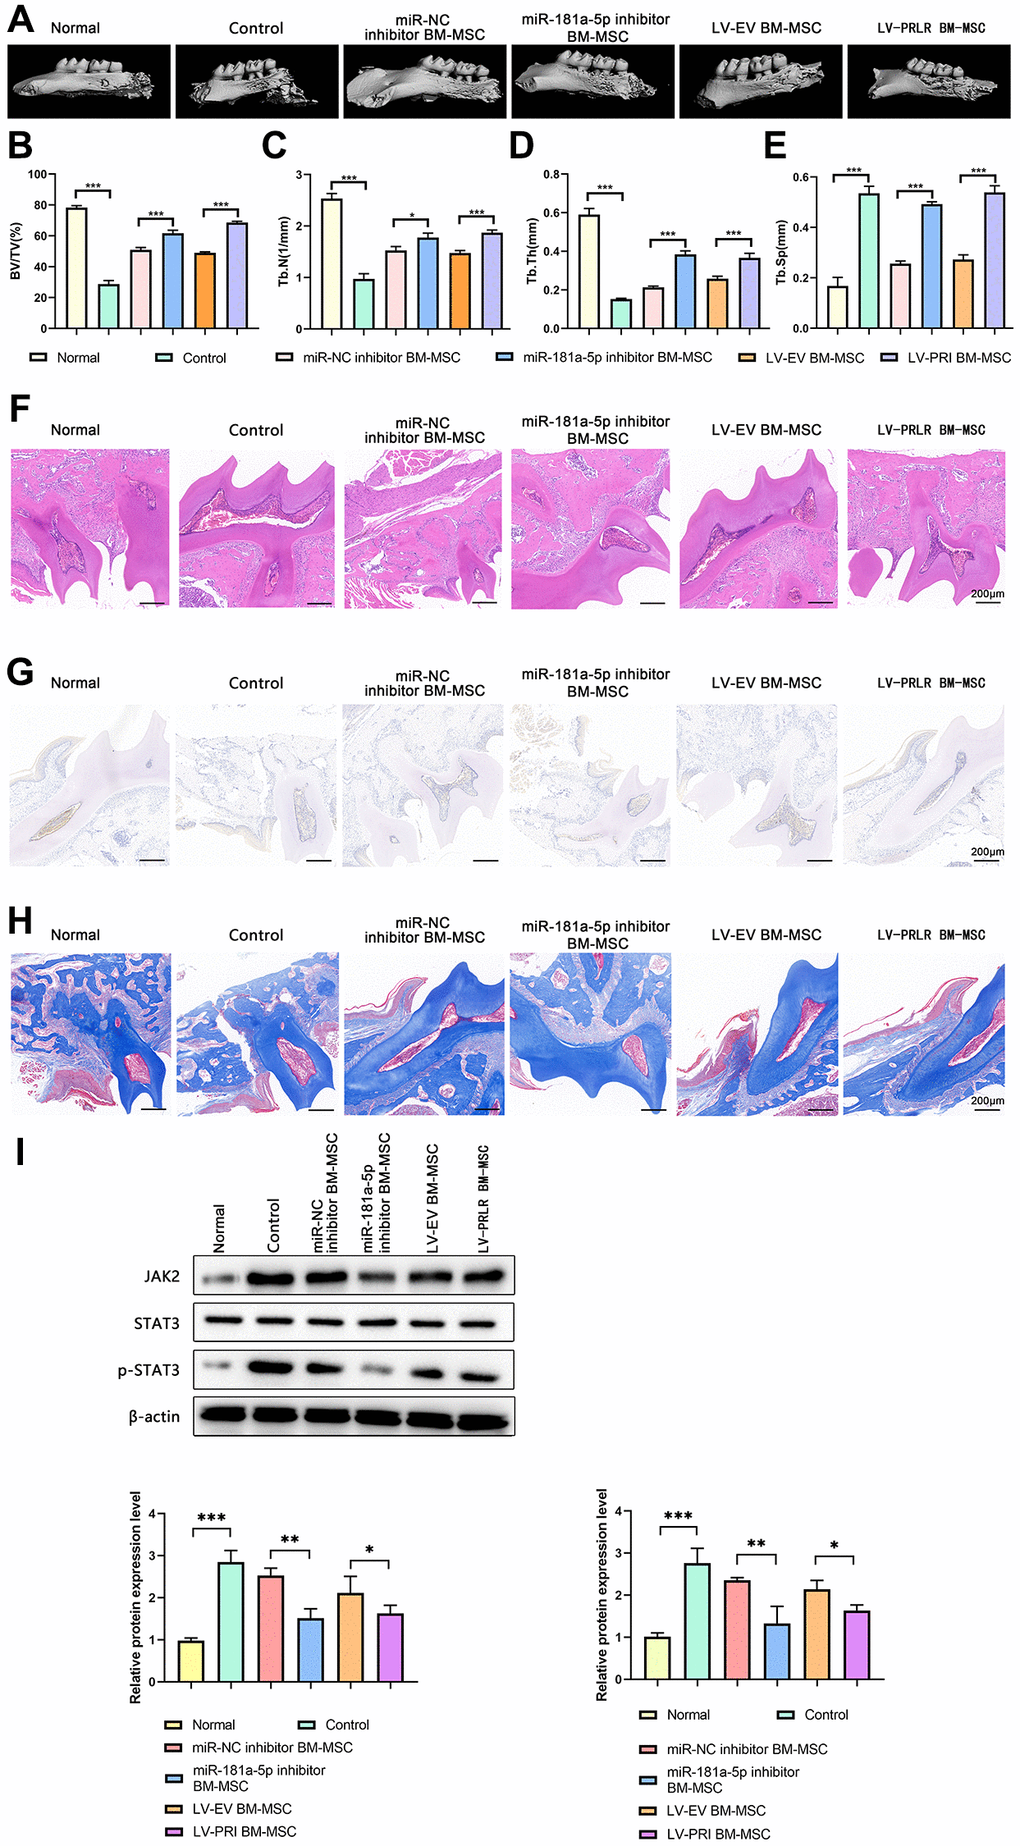 Targeted manipulation of the LncRNA SPIRE1/miR-181a-5p/PRLR pathway in BM-MSCs enhanced their immunomodulation in mice with periodontitis. (A–I) After disease induction, mice were left un-treated, or infused with control mandibular BM-MSCs, or the mandibular BM-MSCs transfected with miR-181a-5p inhibitor, or the mandibular BM-MSC infected with control lentivirus or PRLR-expressing lentivirus as indicated. The up-regulated expression of PRLR after infection of PRLR-expressing lentivirus was confirmed by western blot assays. (A) Micro-CT images show the osteogenesis around the periodontal tissues. (B–E) The BV/TV (%) (B), Tb.N1 (C), Tb.Th (D), and Tb.Sp (E) in mice of the indicated groups were summarized. (F–H) Histological analyses of the periodontal tissues by H&E staining (F), TRAP staining (G), and Masson staining (H) were conducted. The representative images of each group are shown. (I) The protein levels of JAK2 and pSTAT3 in periodontal tissues of the indicated groups were quantitated by western blot assays. n = 5 mice for each group; *P **P ***P 